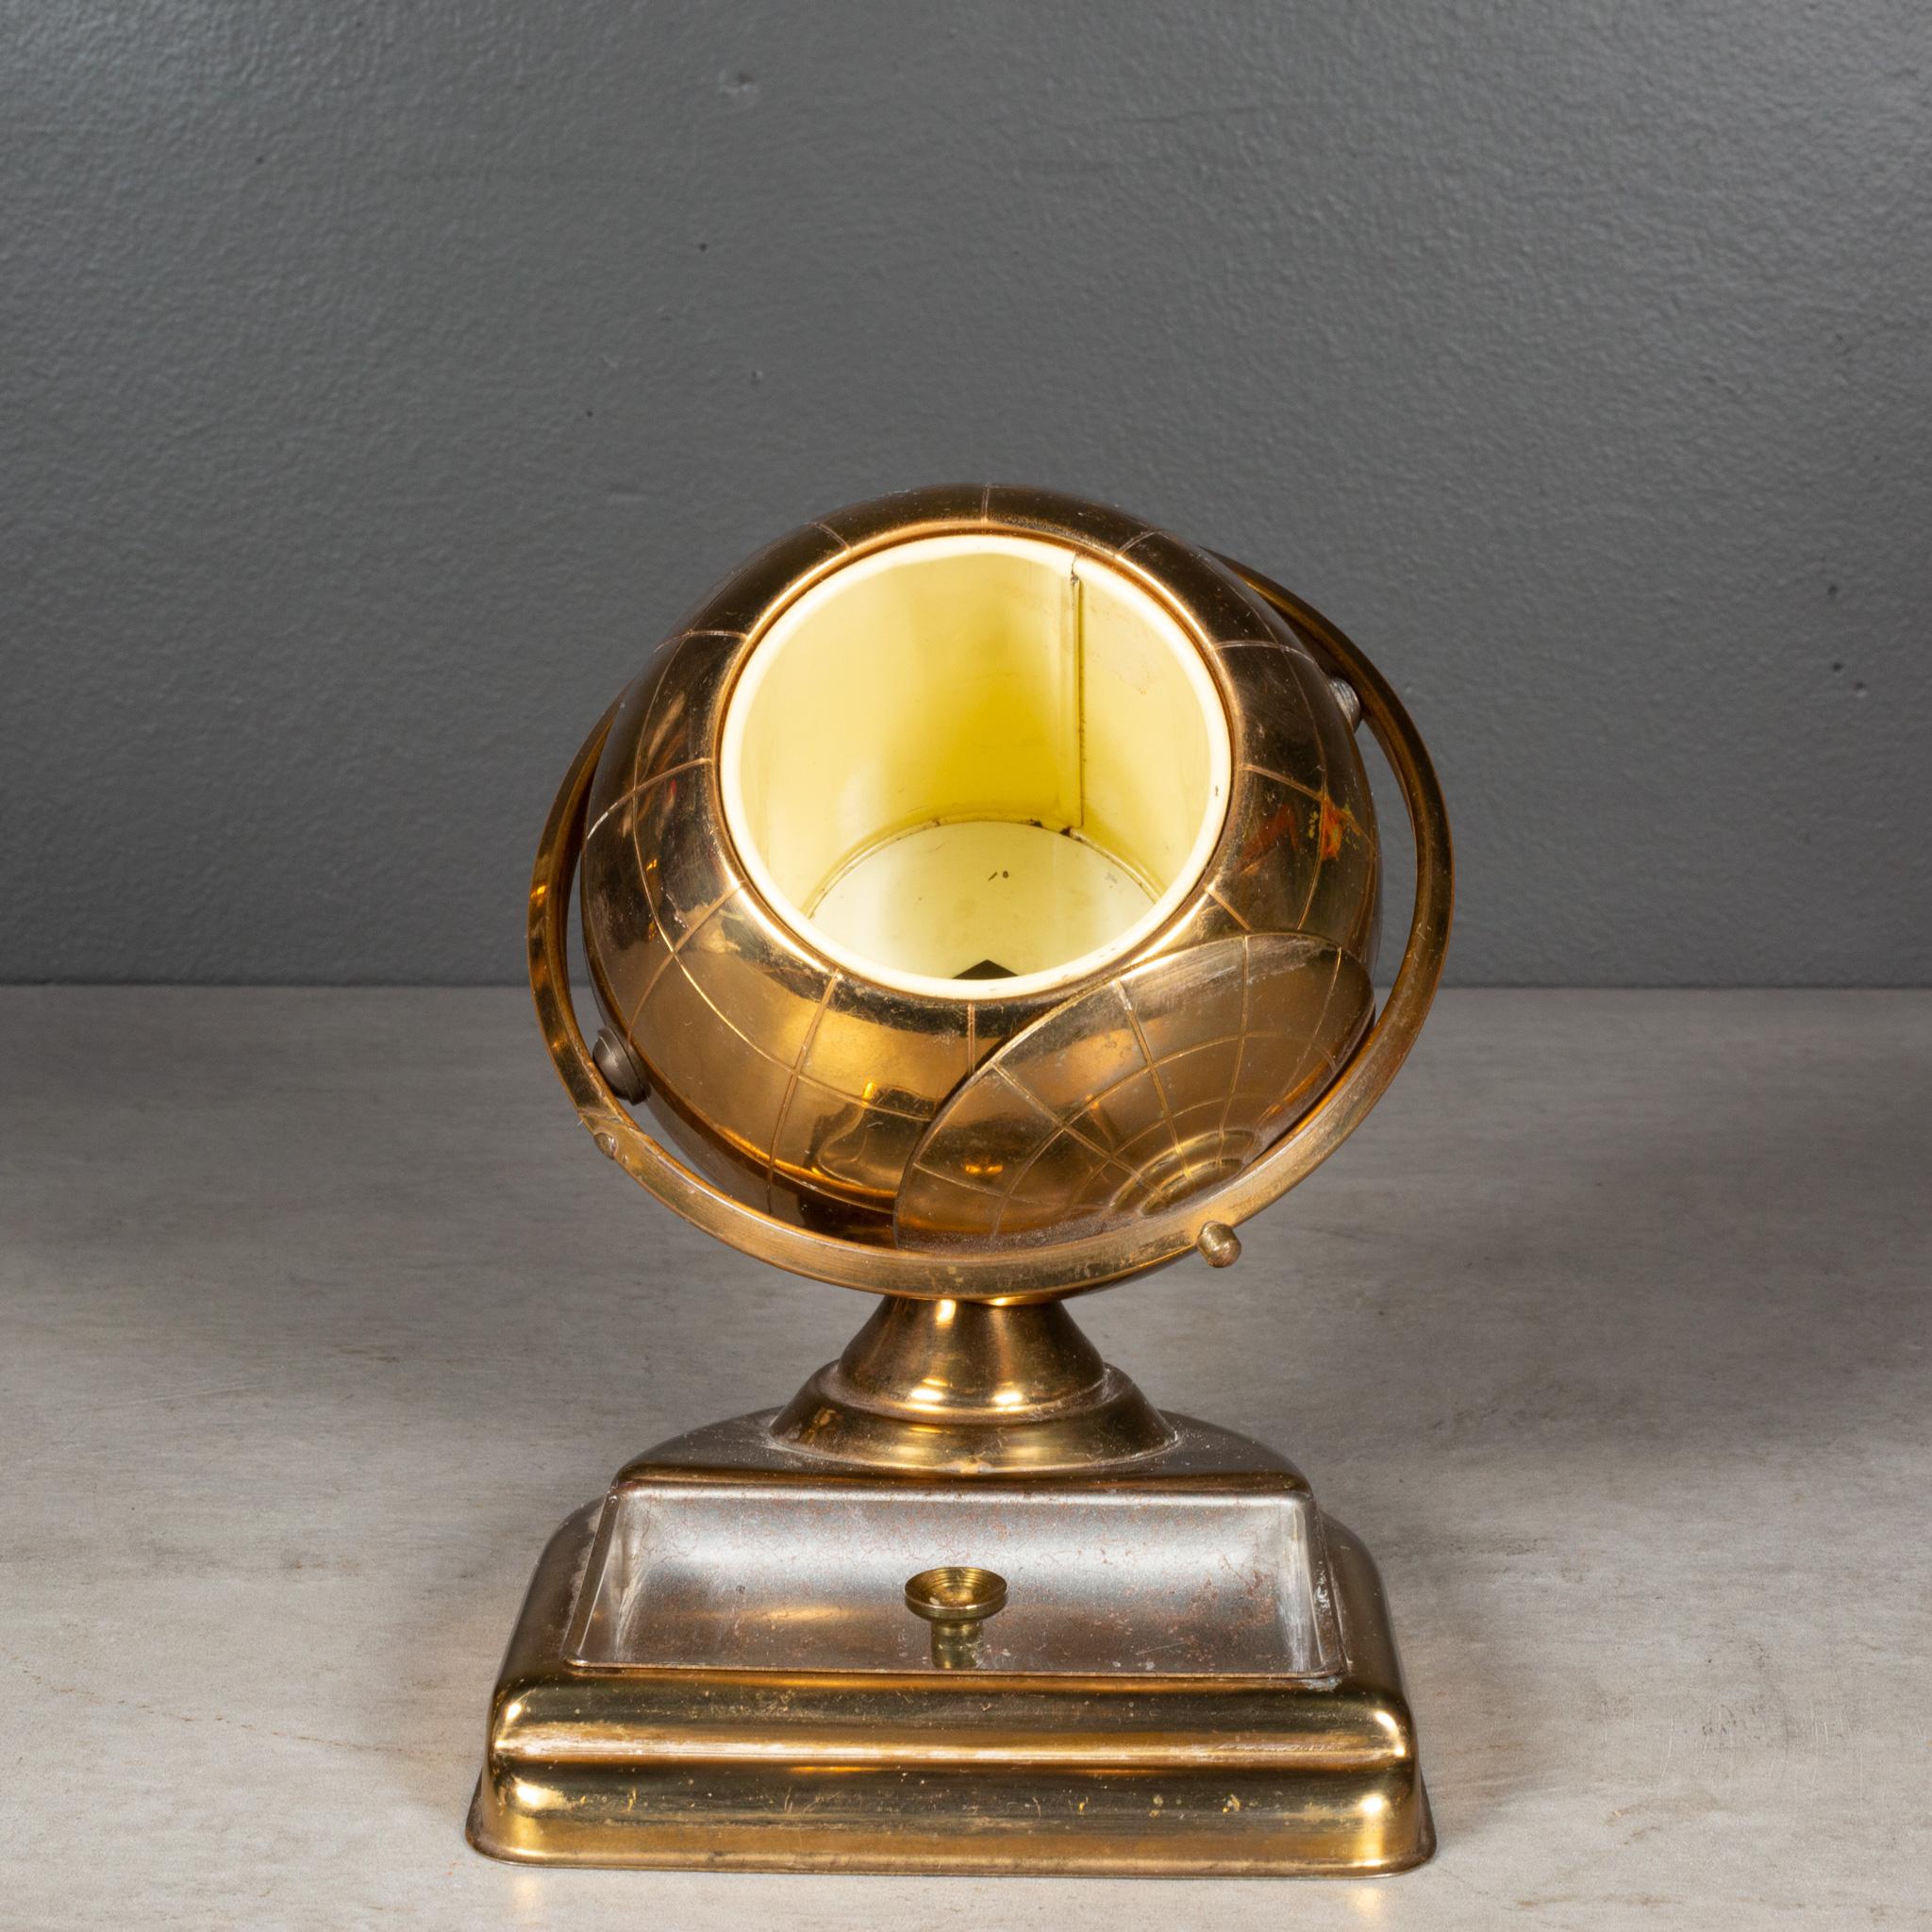 ABOUT

An original midcentury brass cigarette holder and ashtray or coin dish. The lid slides open on the globe's axis to reveal a metal interior designed to hold cigarettes. This globe is unique because it has an attached tray.

 CREATOR: Unknown.
